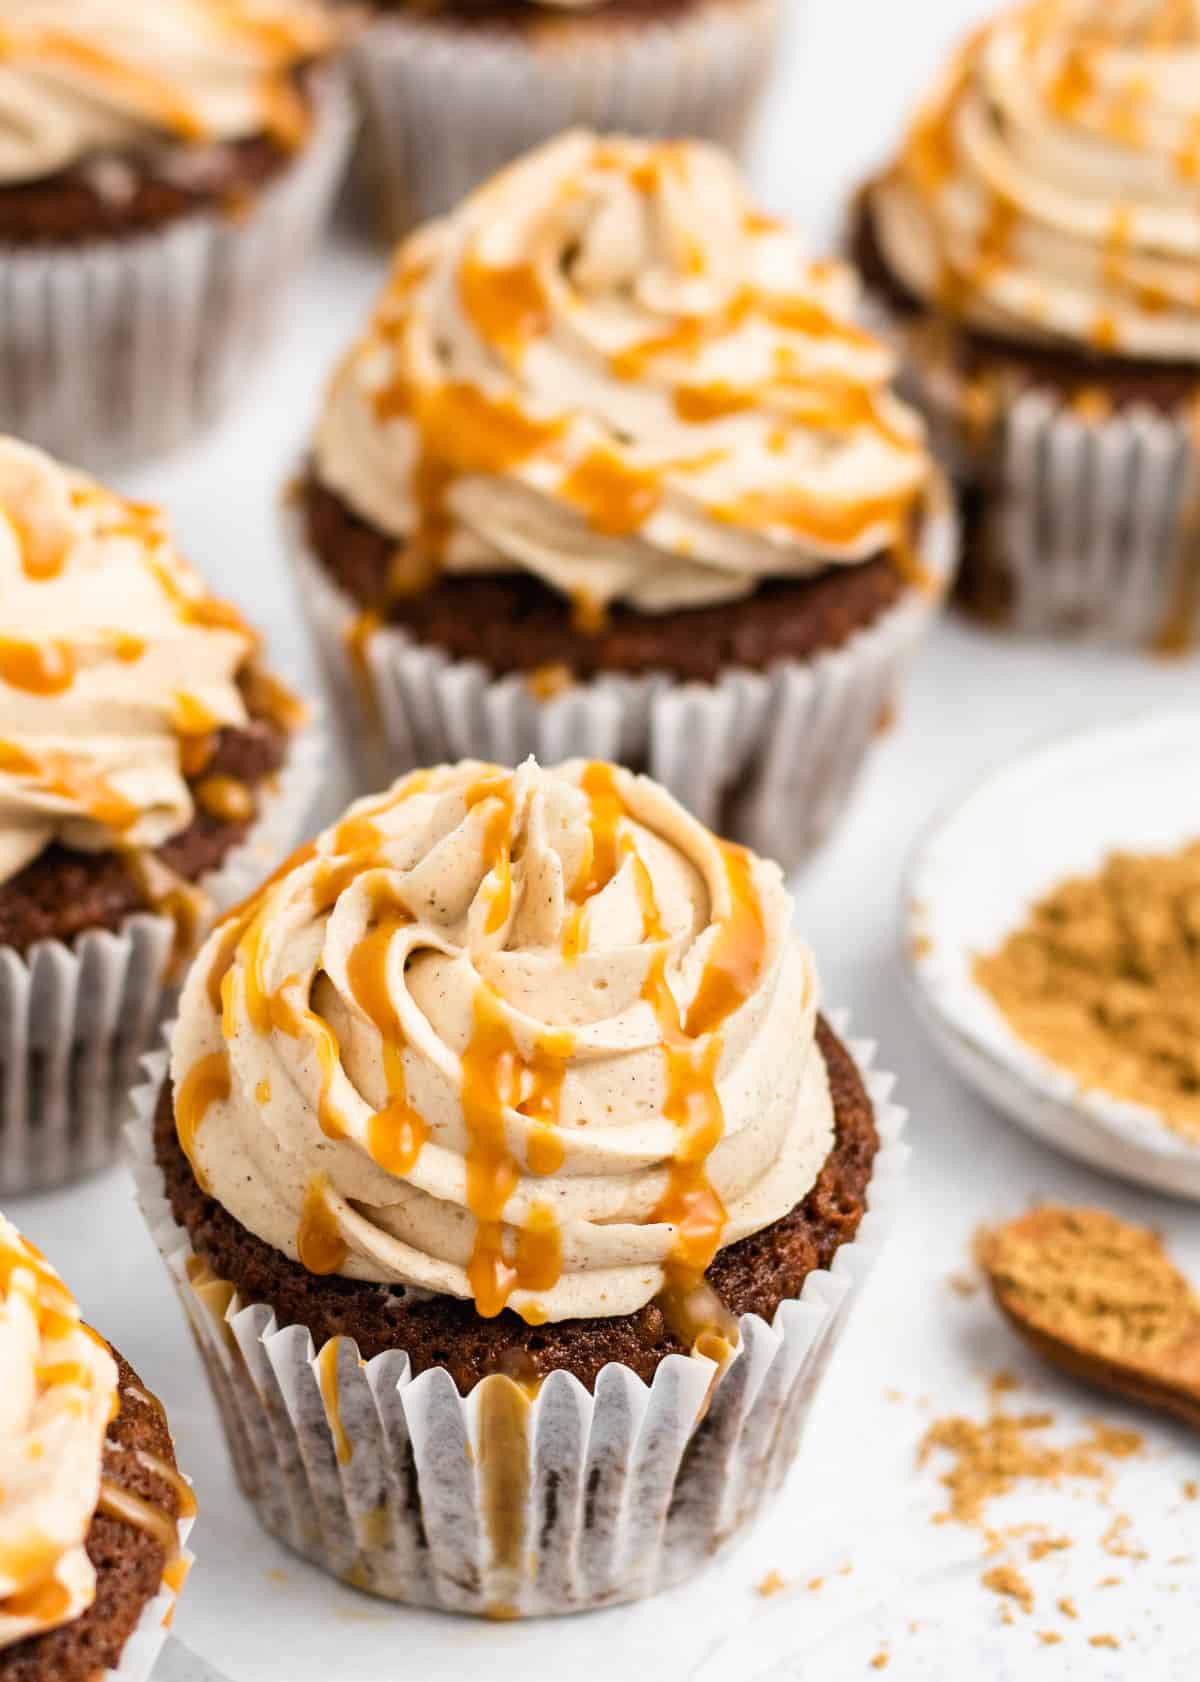 Festive Gingerbread Cupcakes drizzled with caramel sauce. 